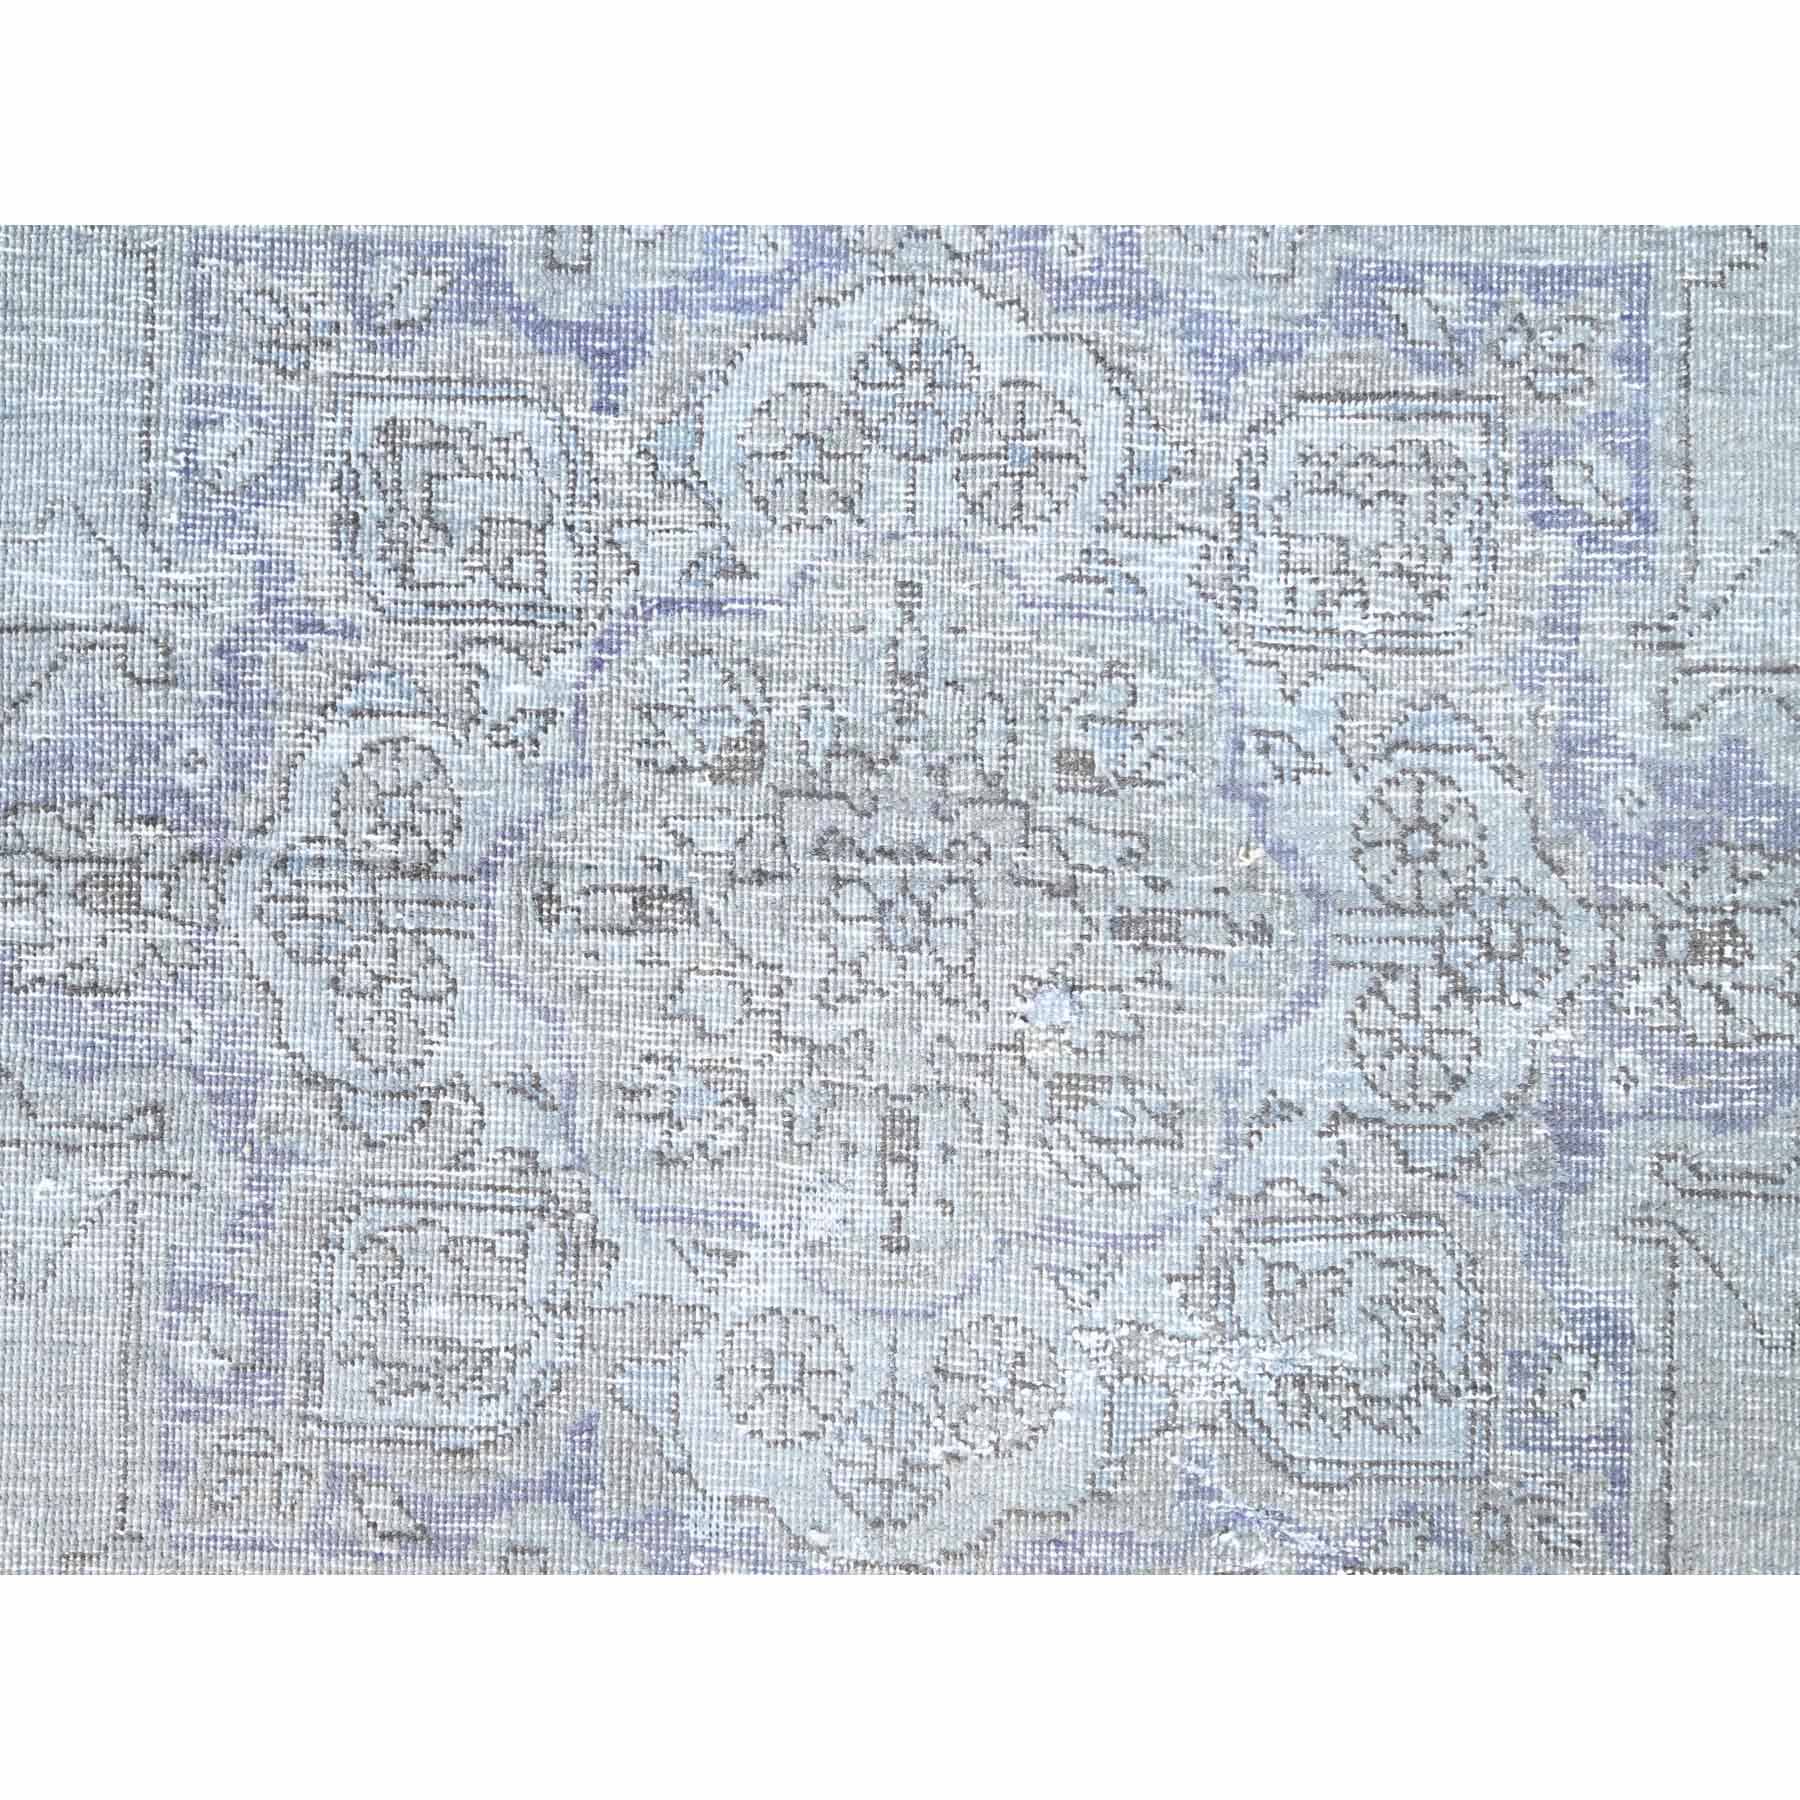 Overdyed-Vintage-Hand-Knotted-Rug-426985